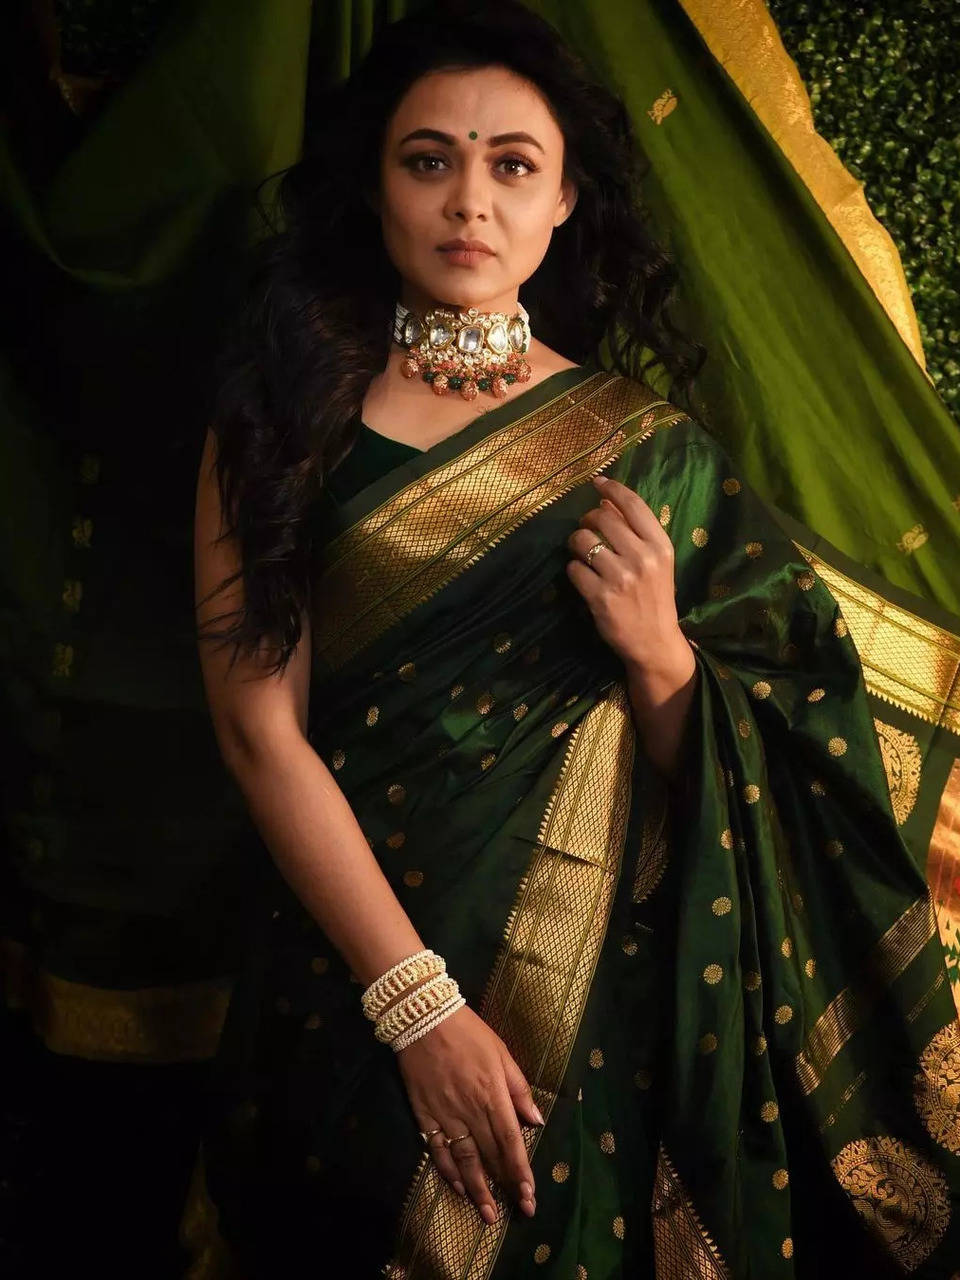 Stunning looks of Prarthana Behere in saree | Times of India